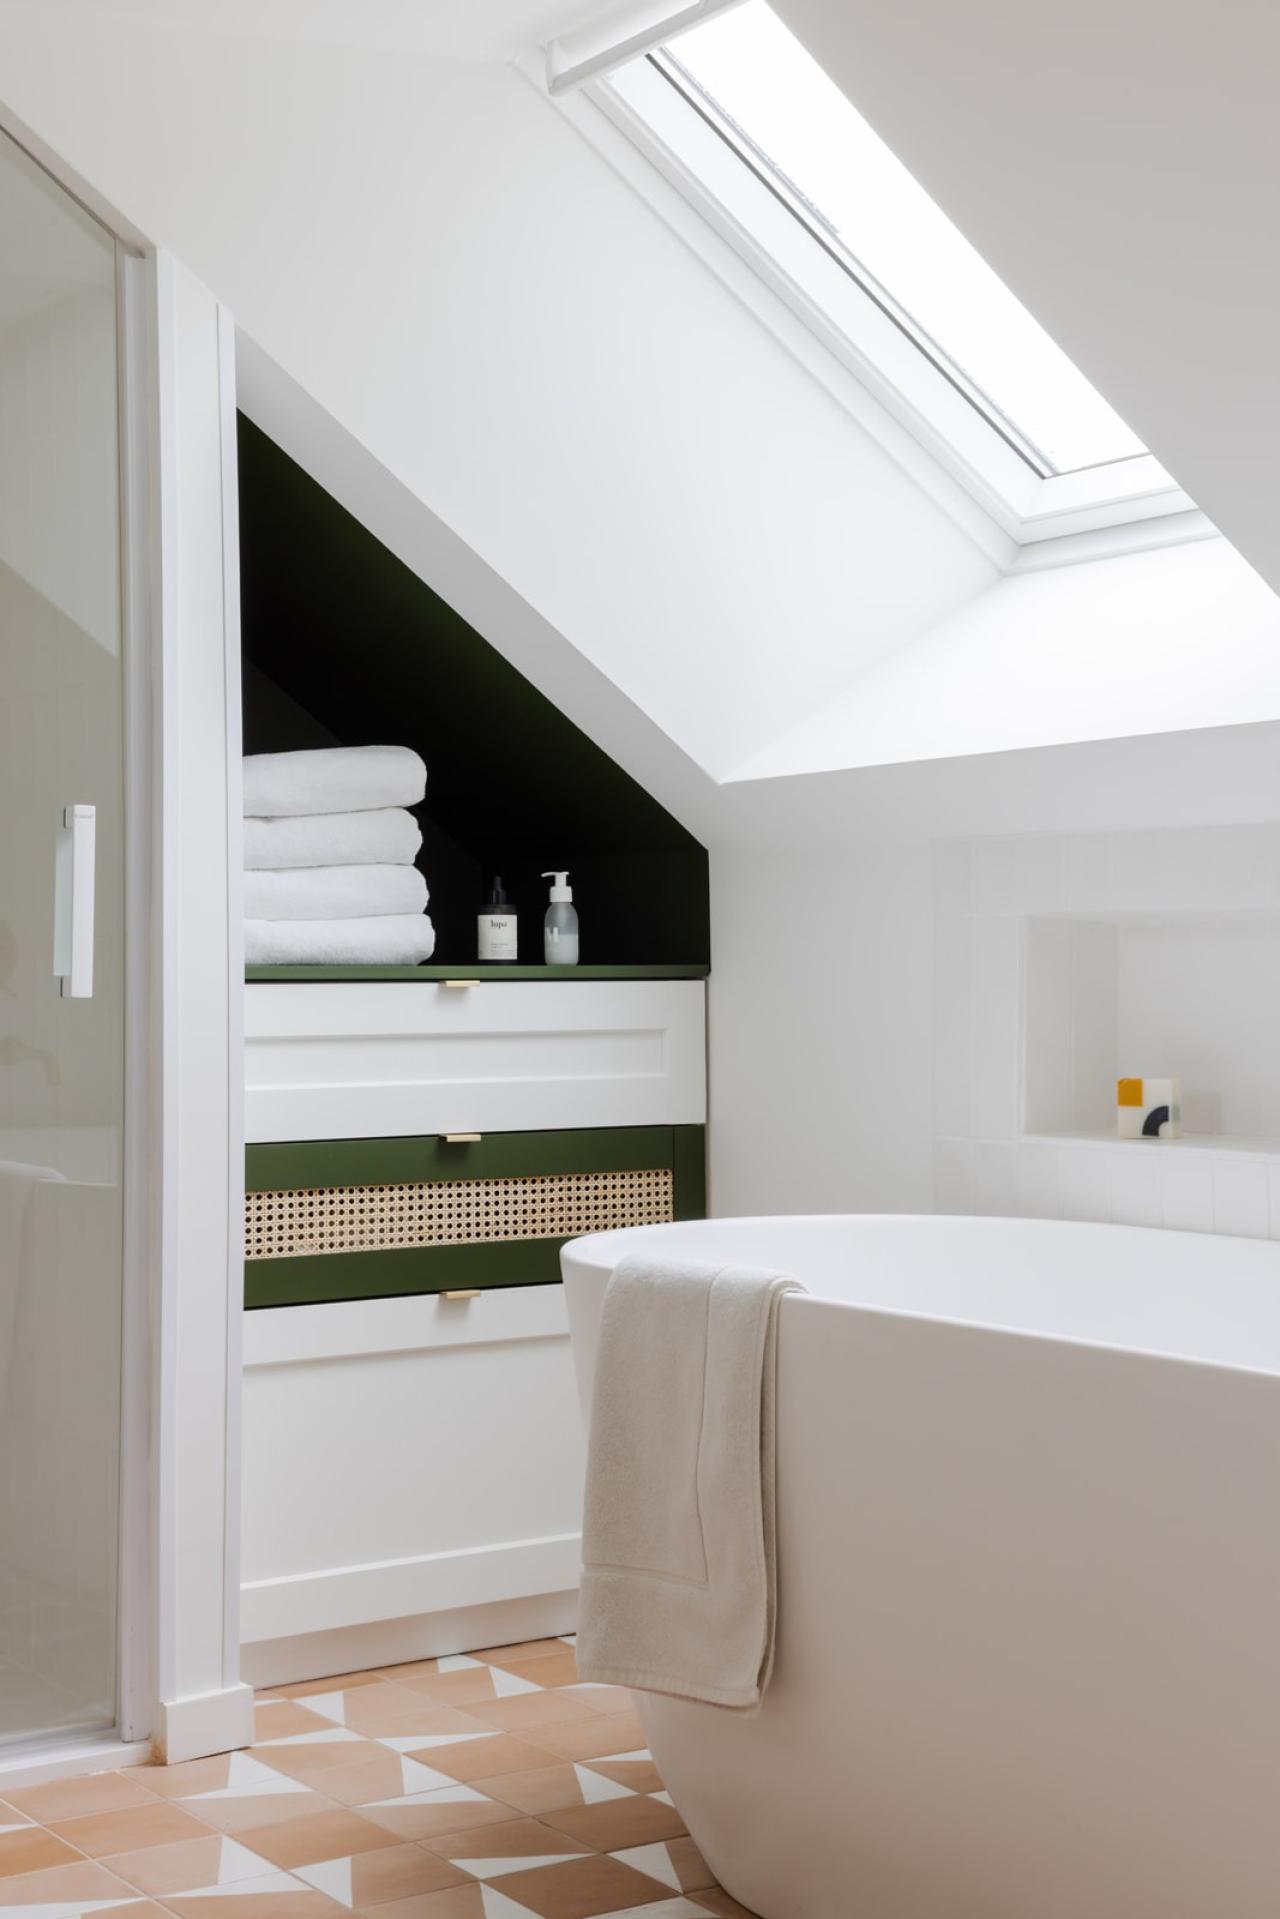 Olive green and white bathroom furniture under the eaves